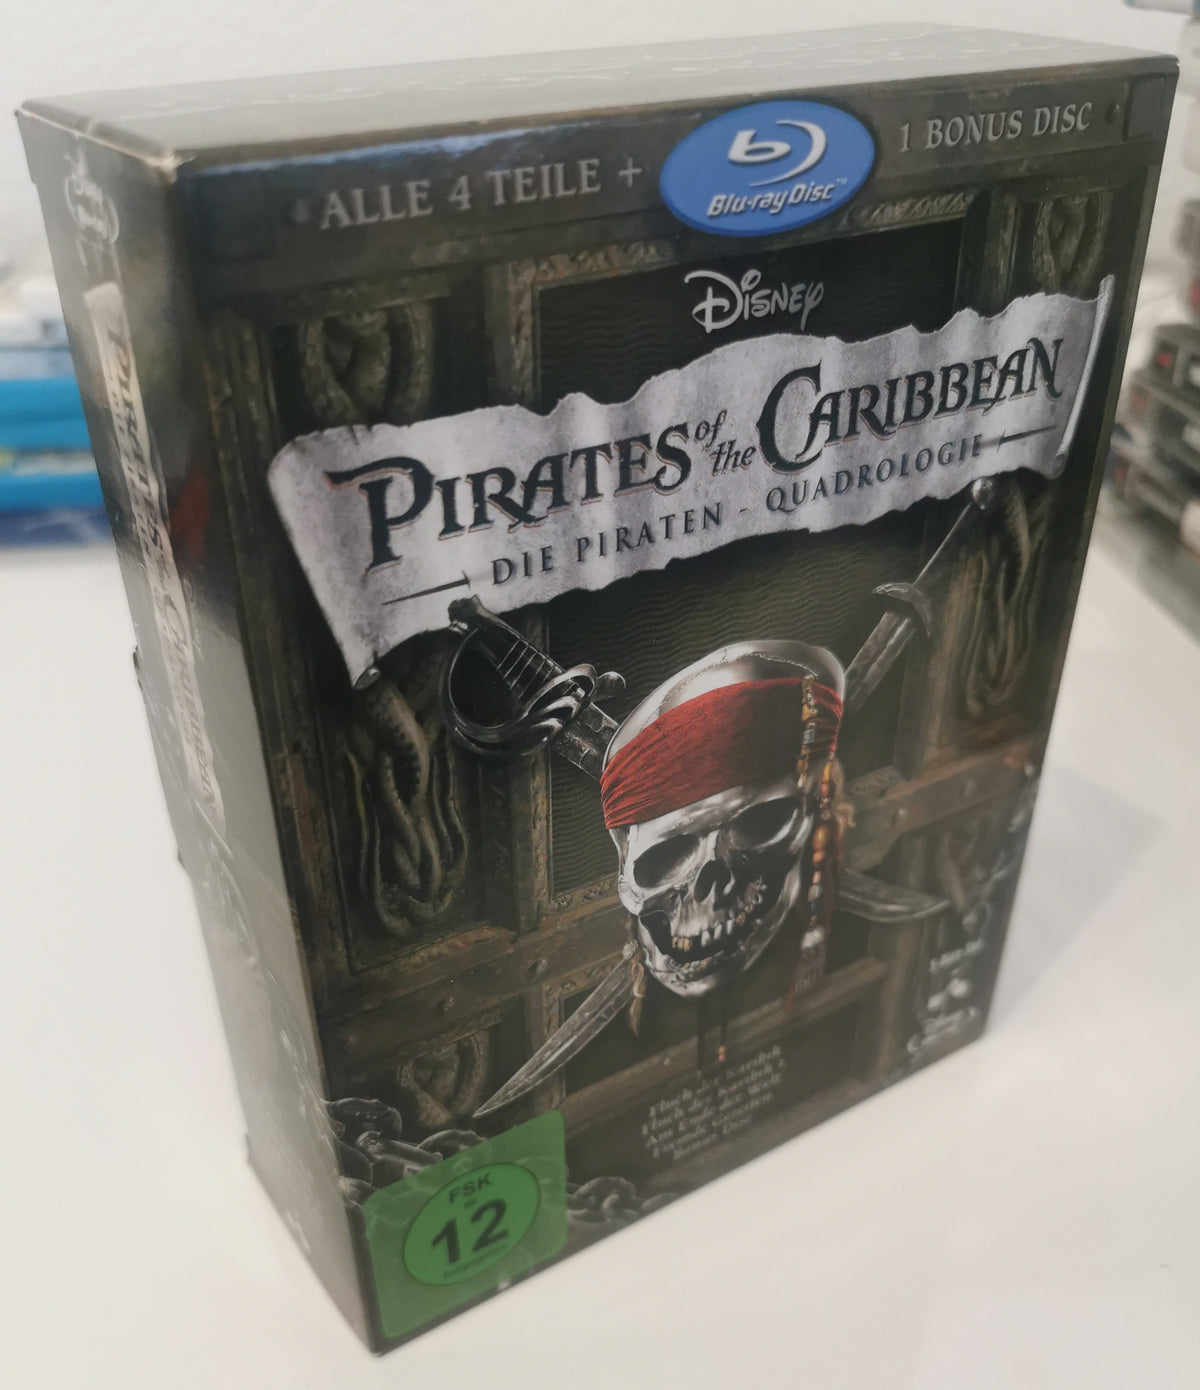 Pirates of the Caribbean Die PiratenQuadrologie 5 Blurays Bluray (Blu-ray) [Sehr Gut]